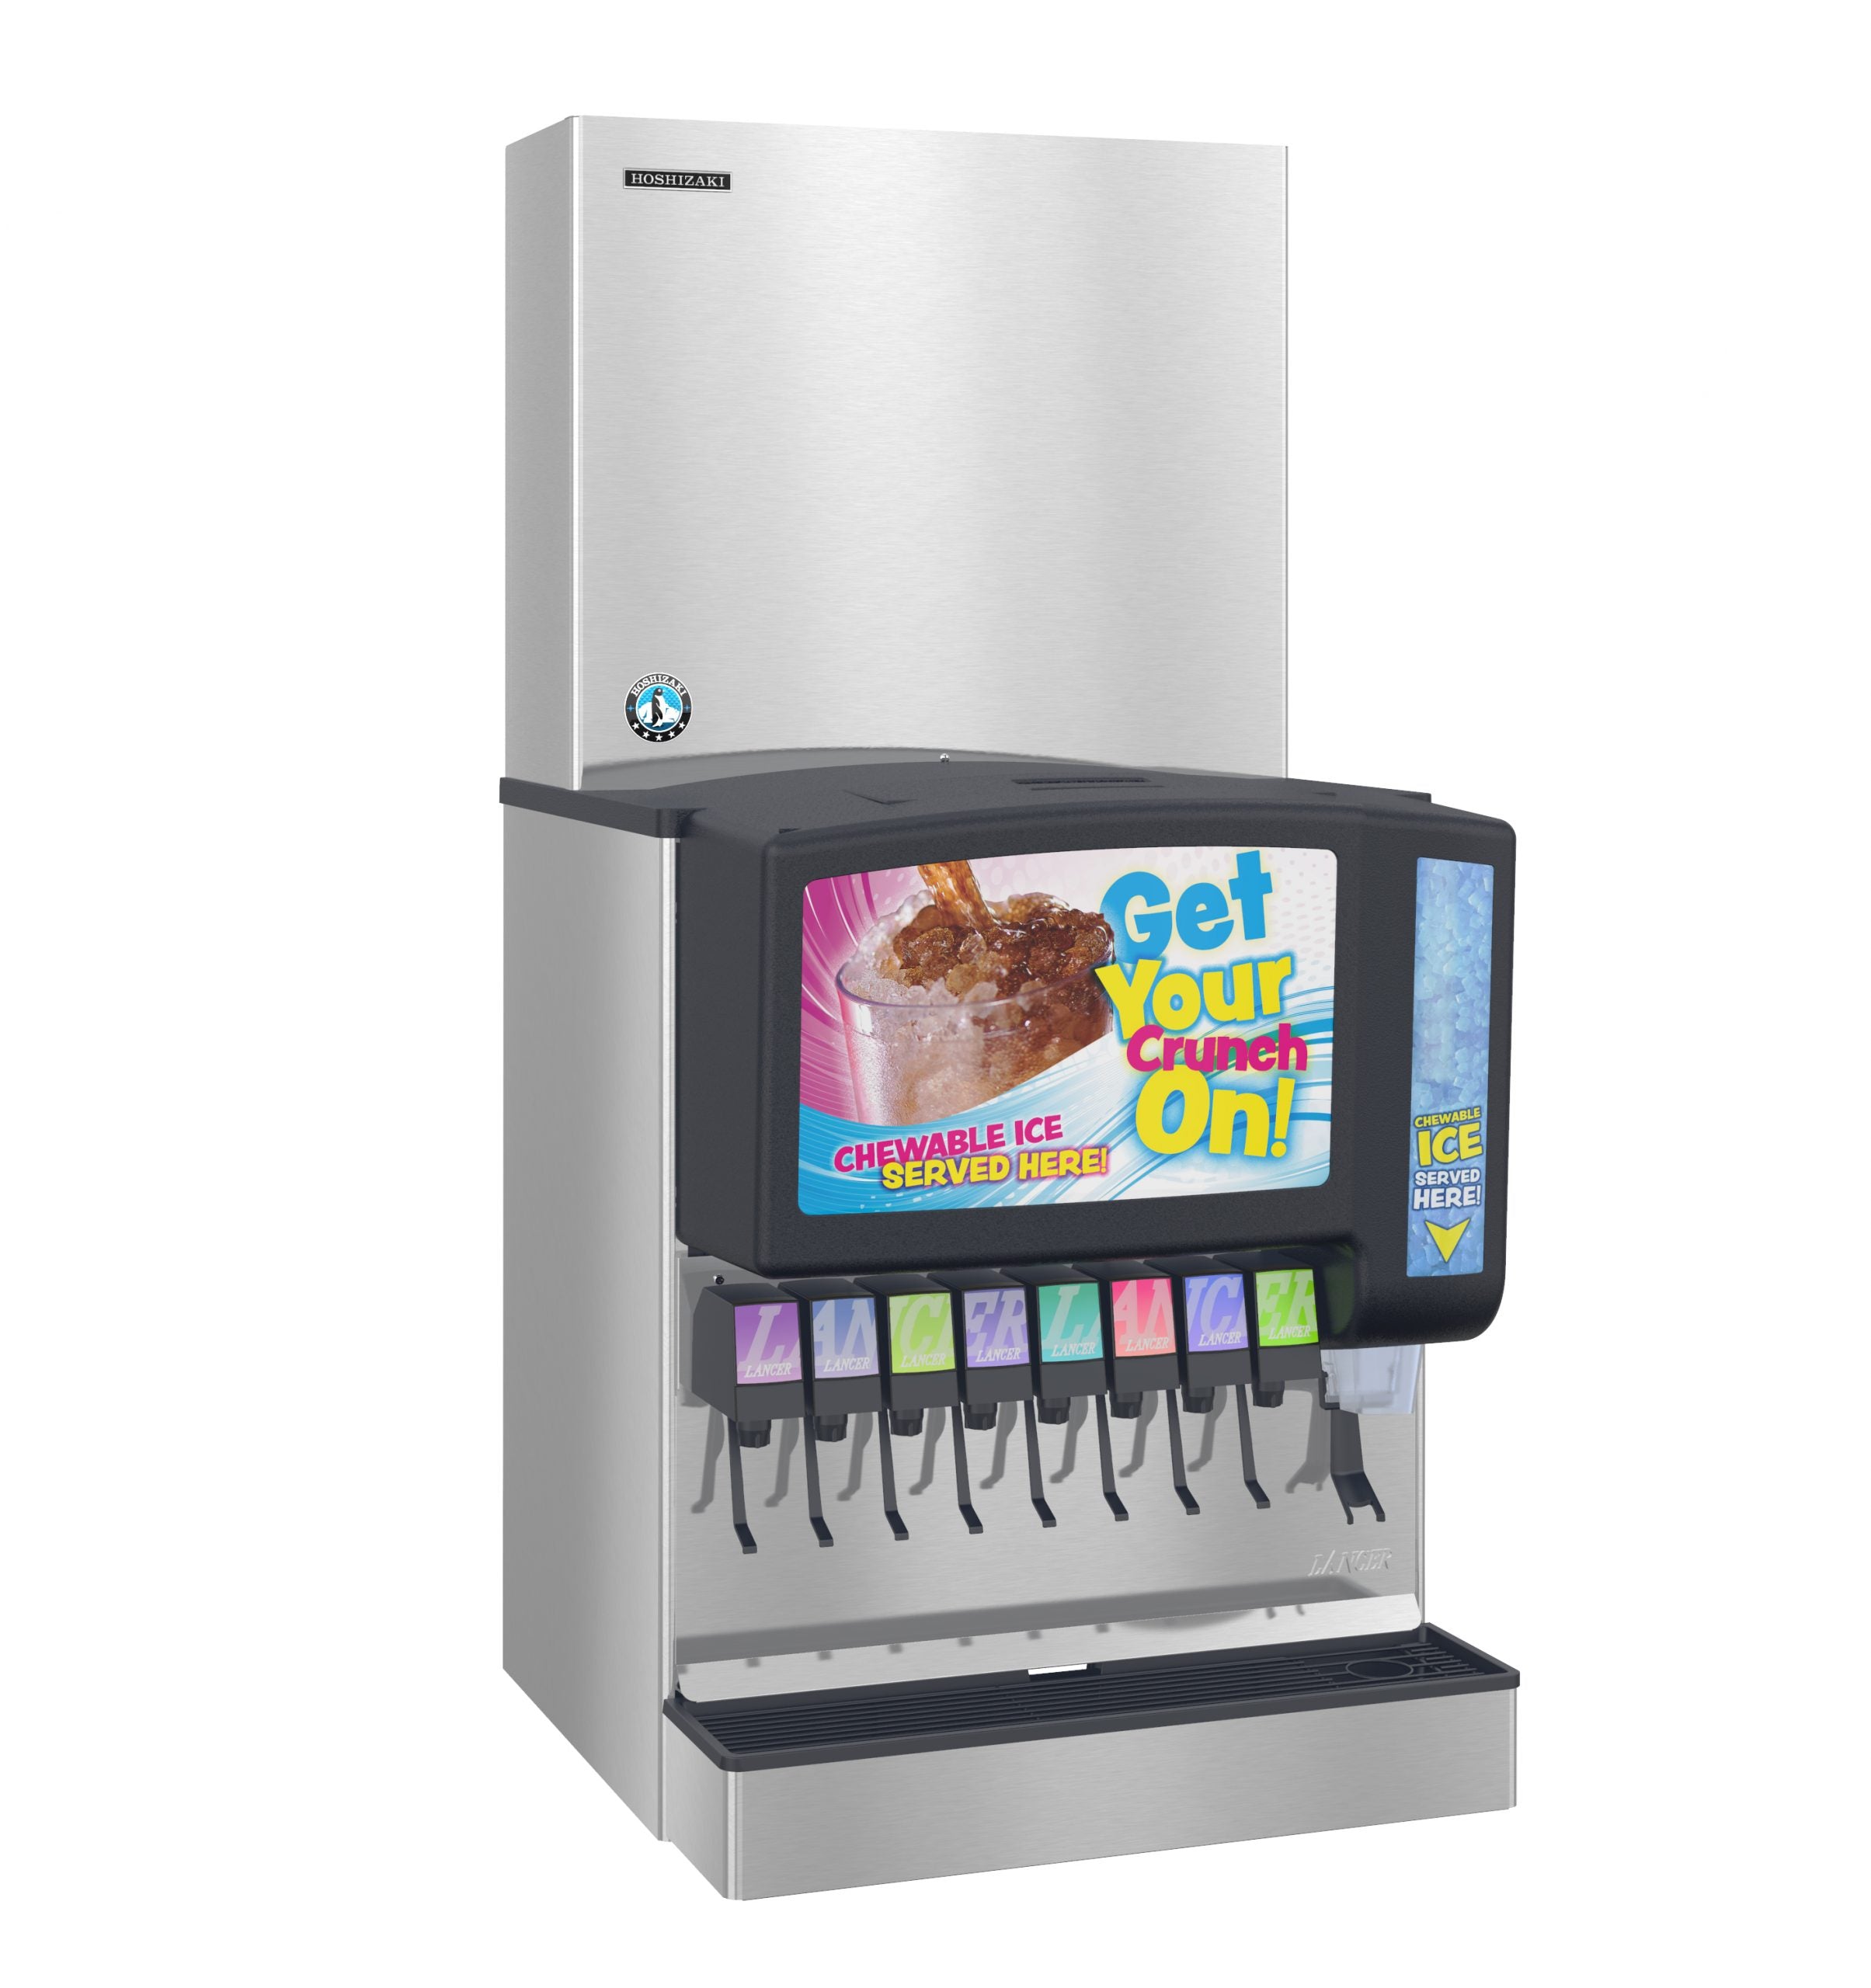 Hoshizaki FS-1001MLJ-C | 30" Wide Remote-Cooled Small Cubelet Ice Maker Serenity Series (Dispenser & Condenser Sold Separately)